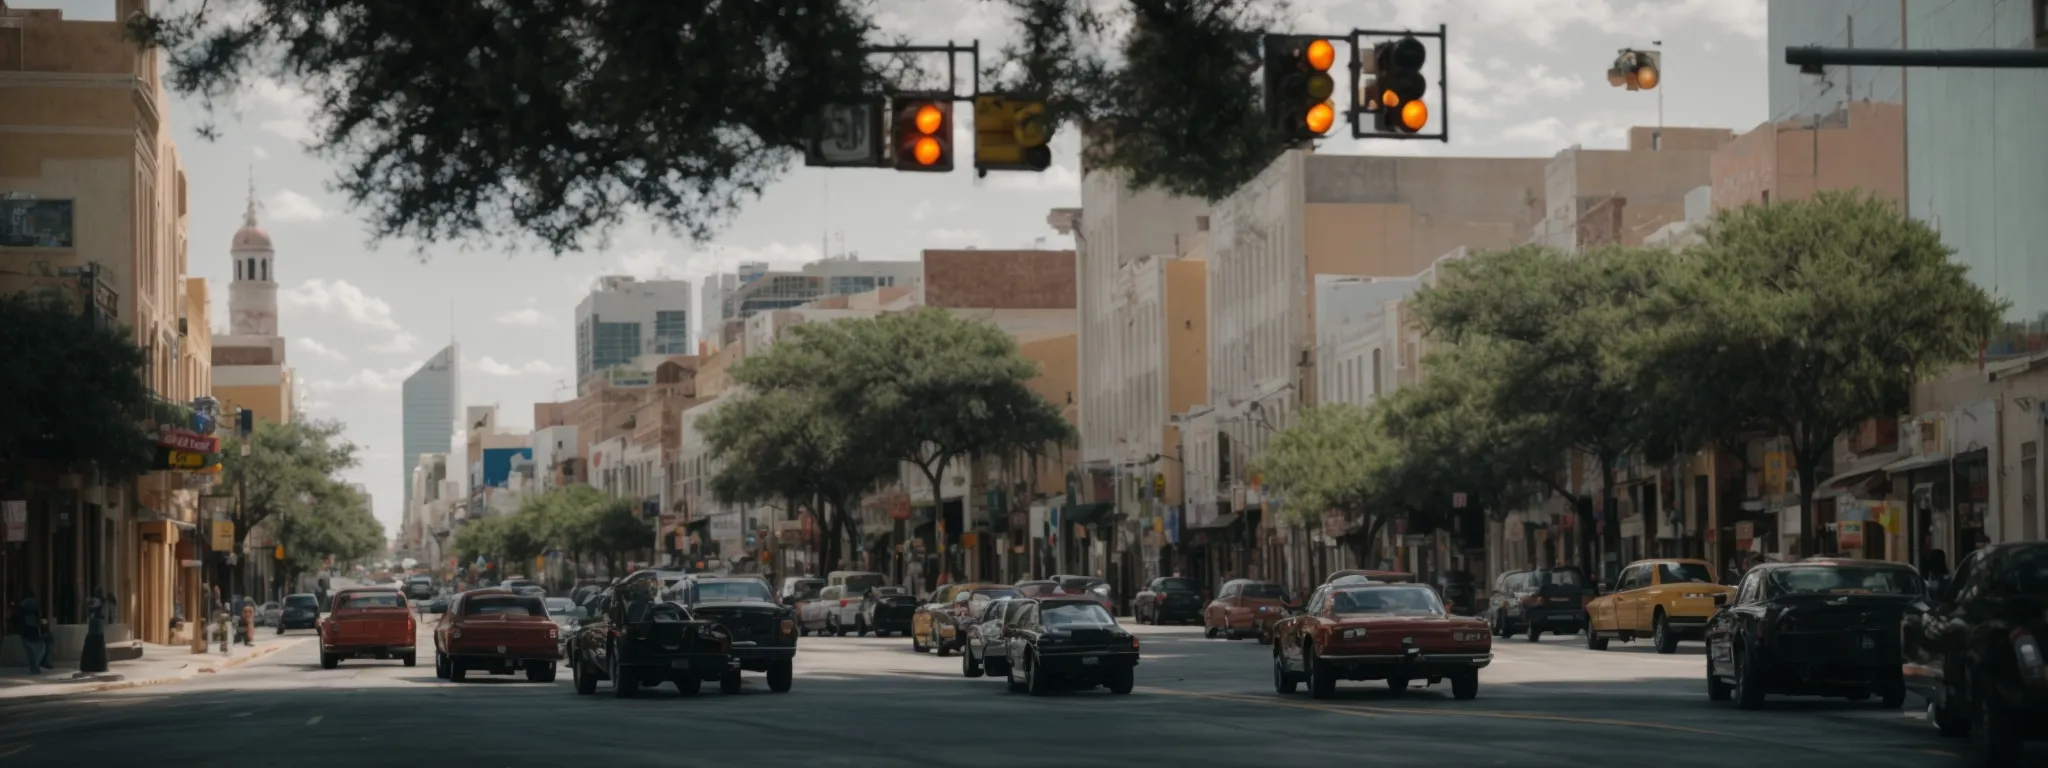 a wide, bustling street in san antonio with vehicles at a traffic light, capturing the city's vibrant urban life.